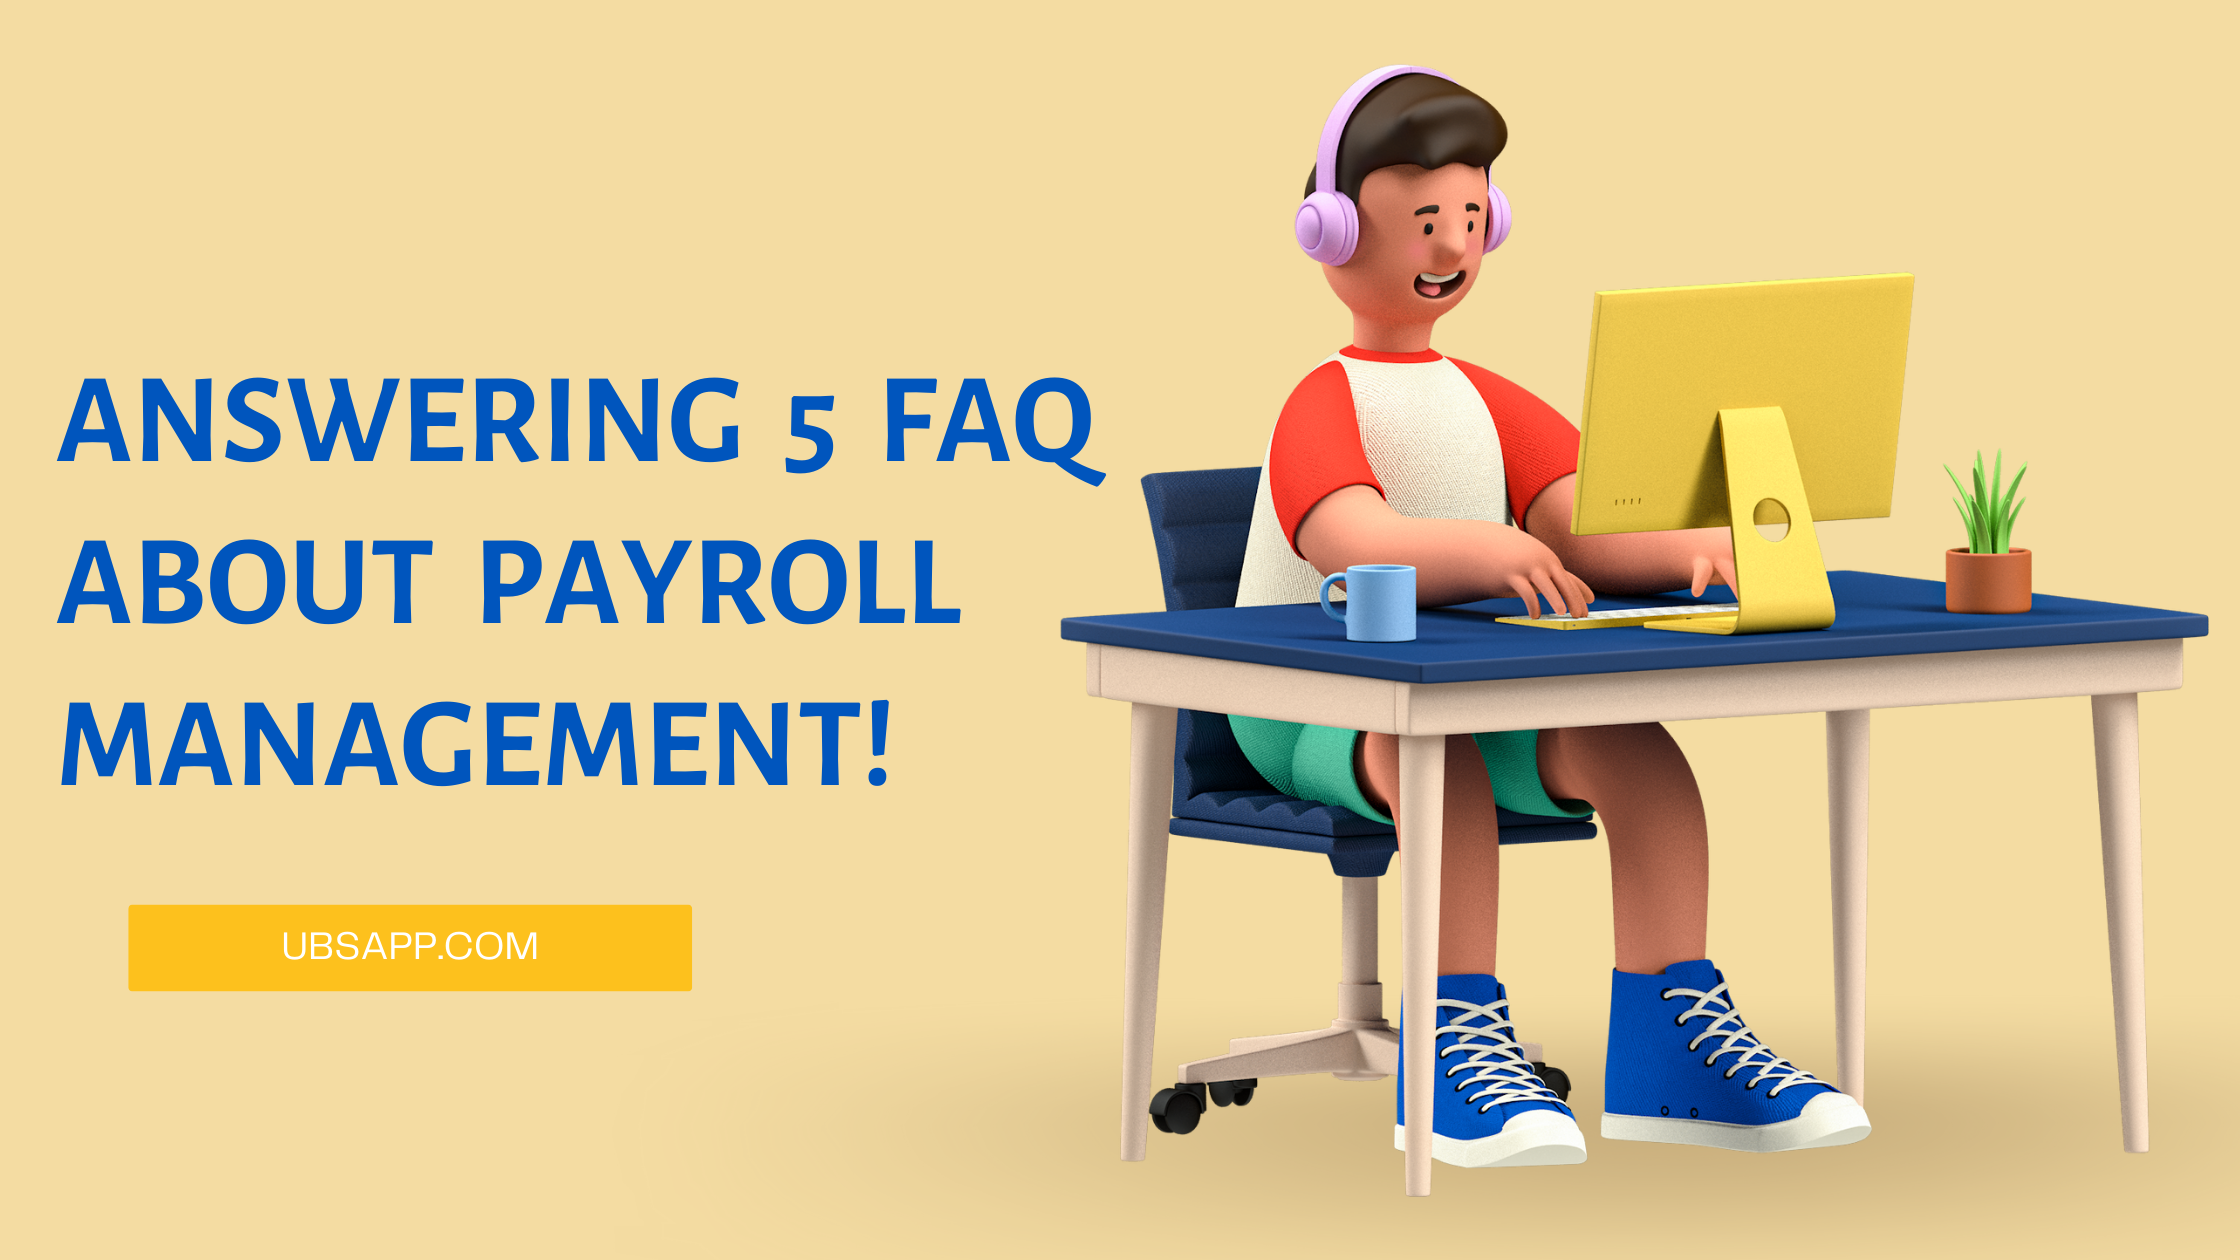 FAQs about payroll management